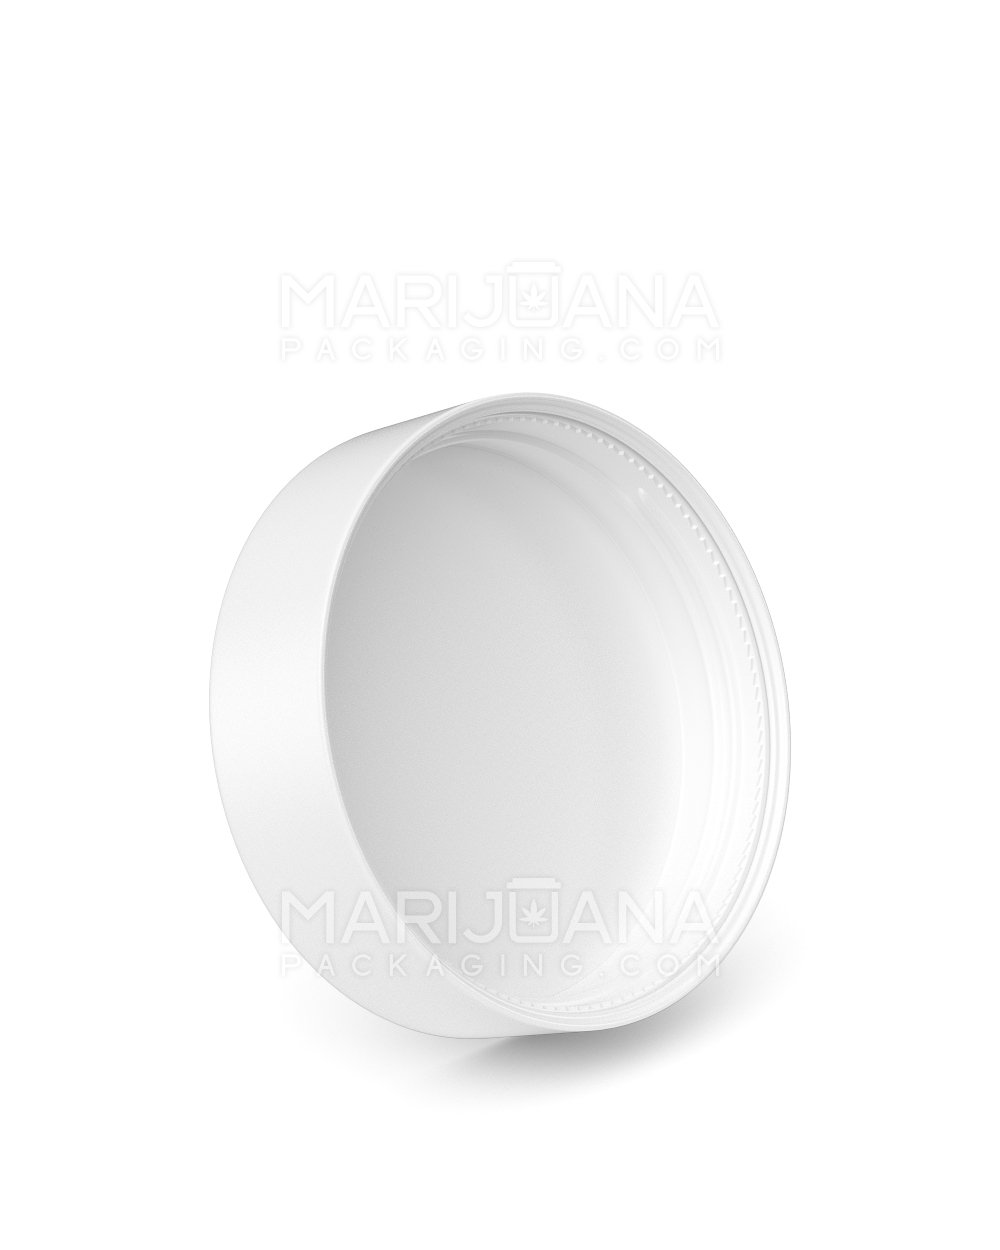 Child Resistant | Smooth Push Down & Turn Plastic Caps w/ Foam Liner | 63mm - Semi Gloss White - 96 Count - 2